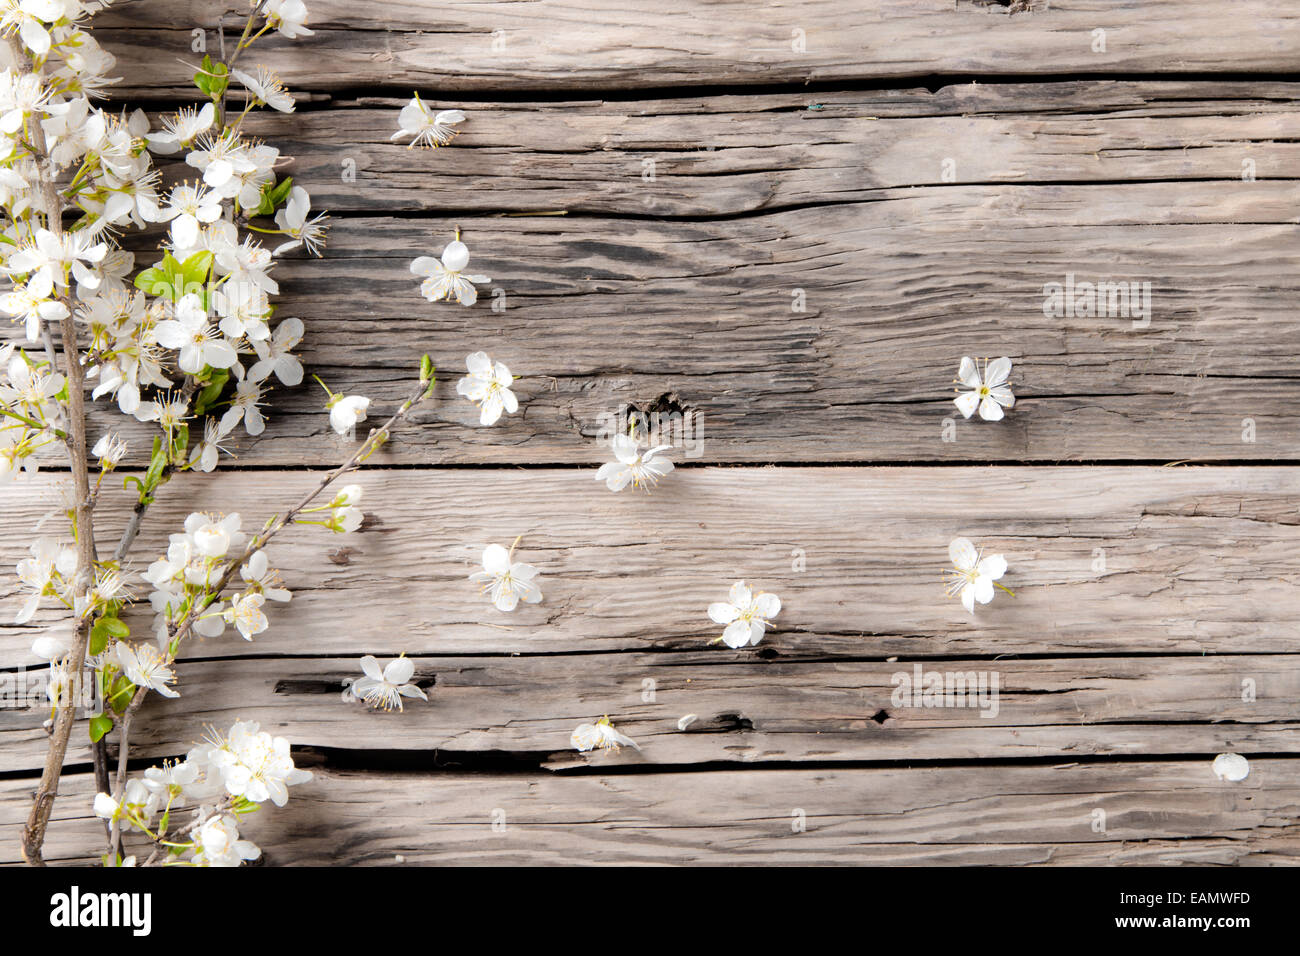 Spring white blossoms on wooden planks surface. Free space for text Stock Photo